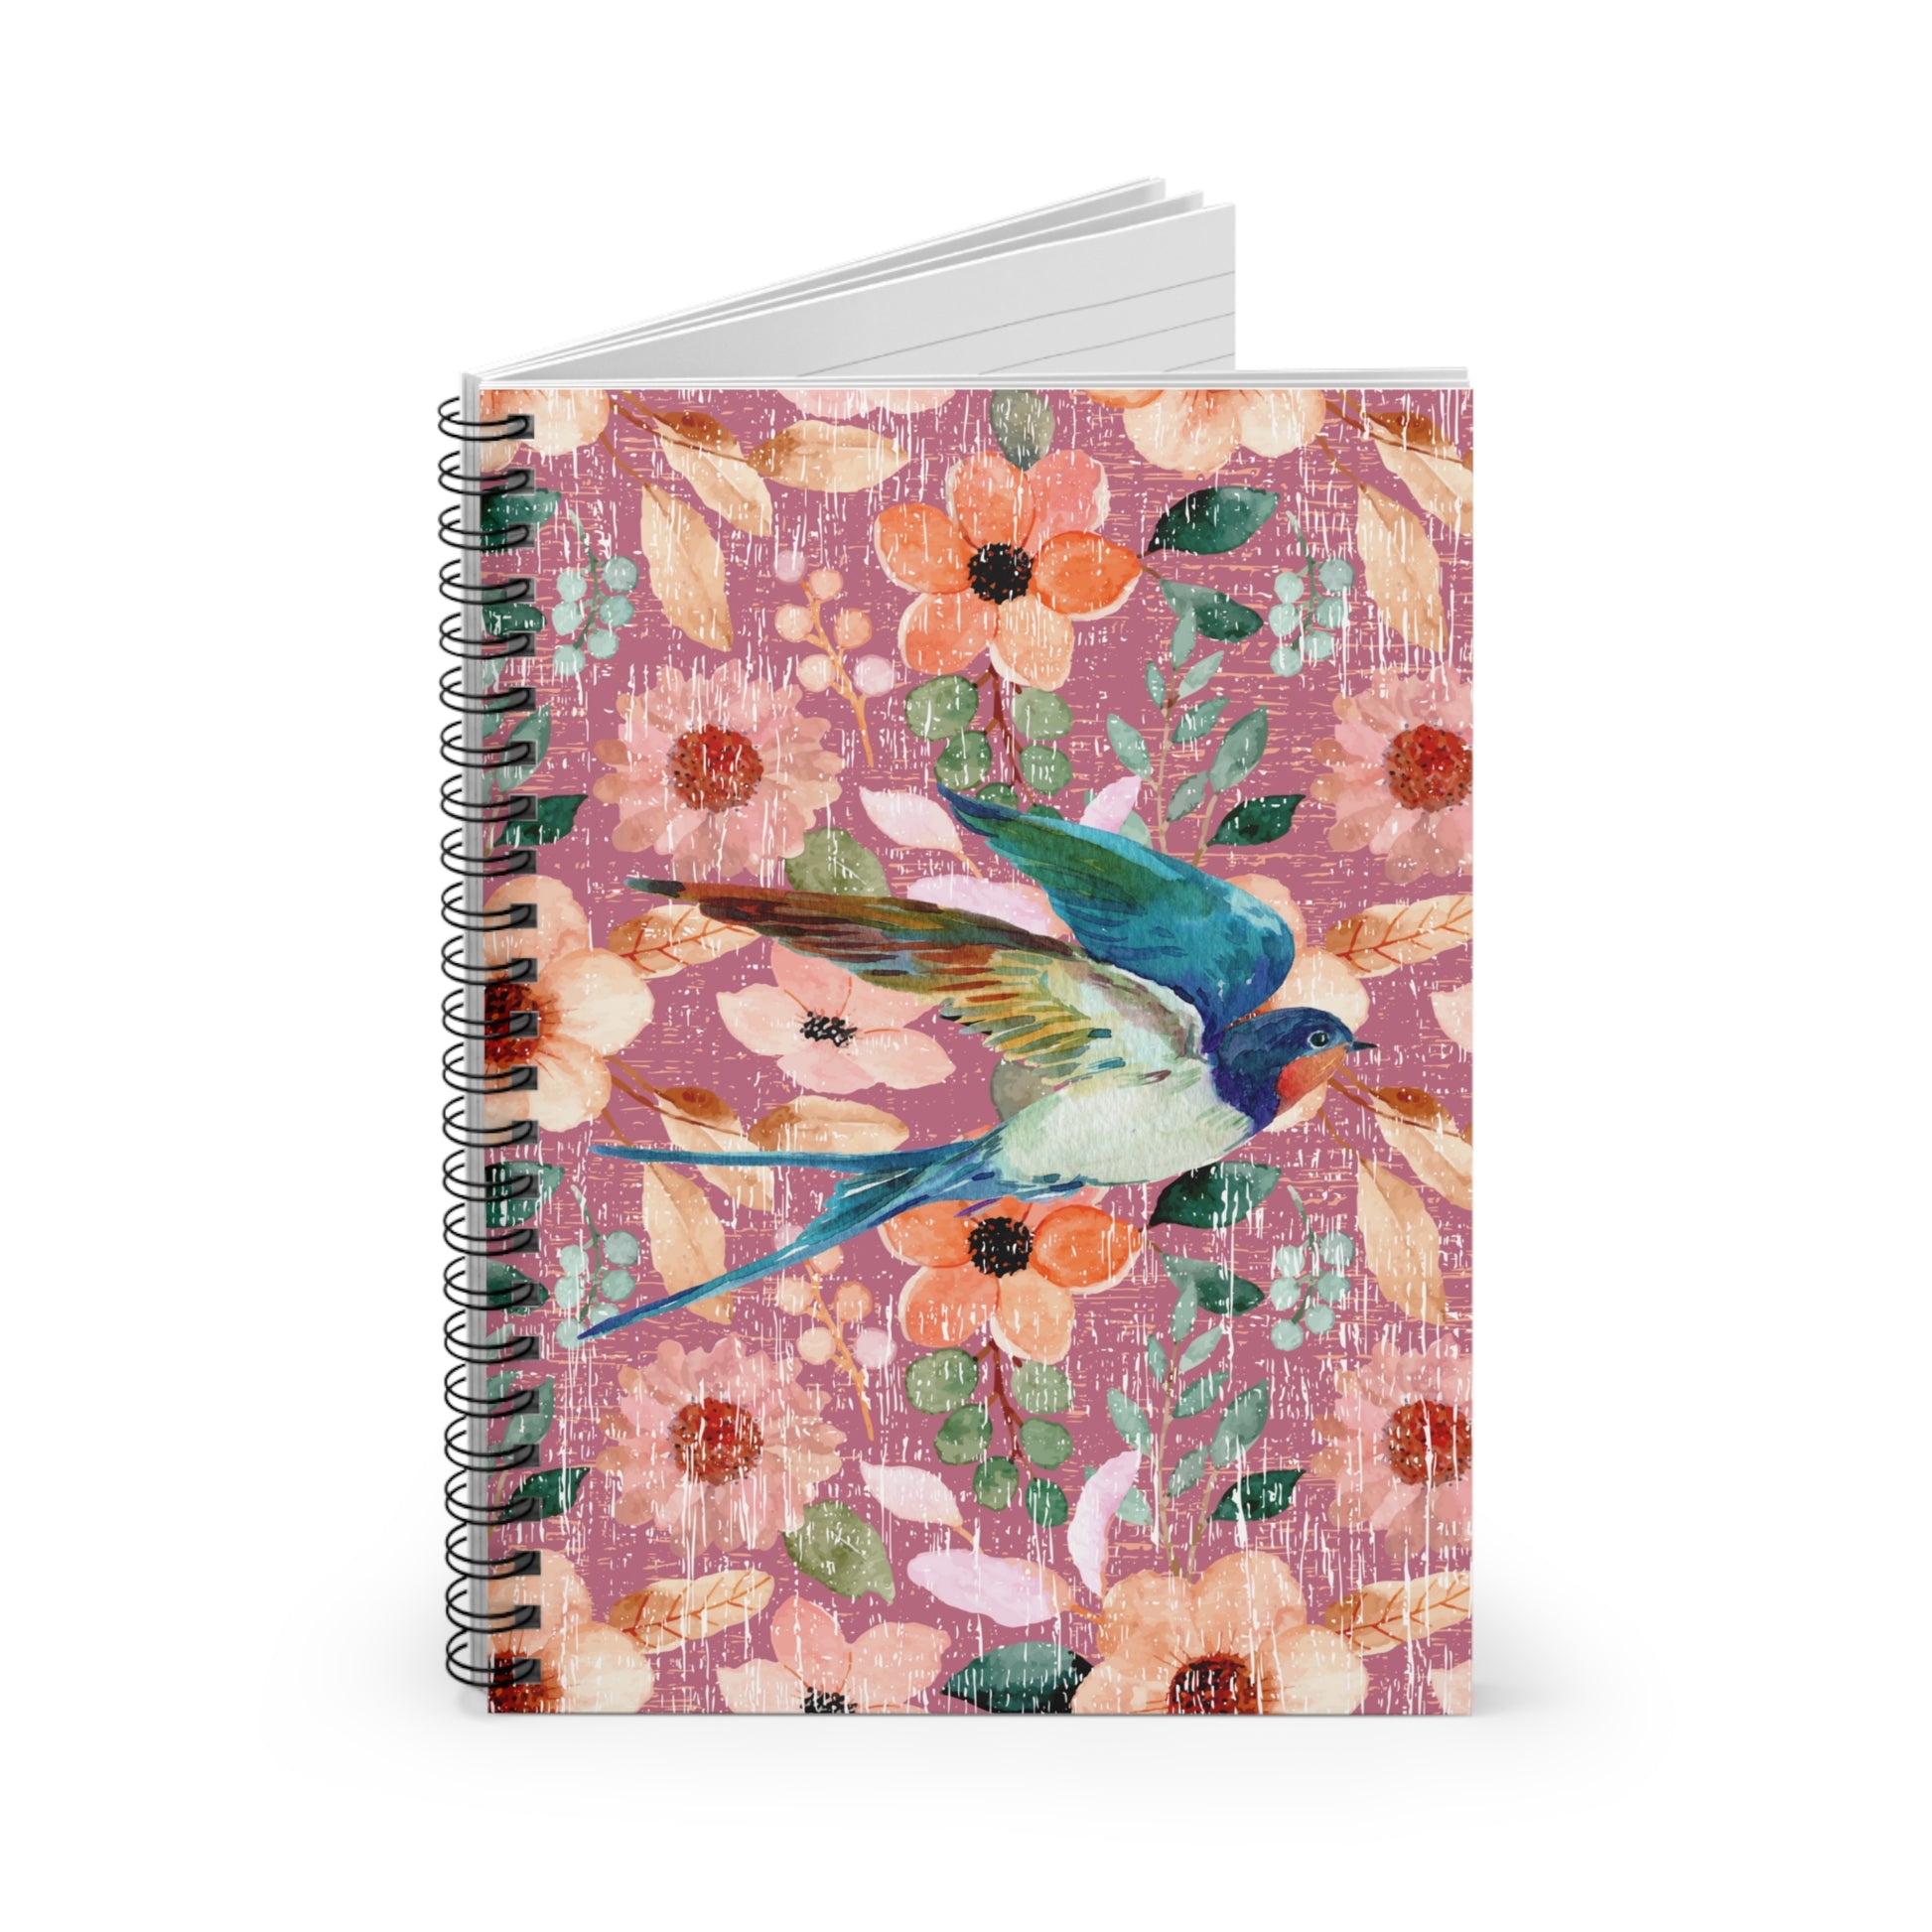 Bluebird Serenity: Floral Spiral Notebook for Tranquil Reflections and Nature-Inspired Thoughts - Eddy and Rita